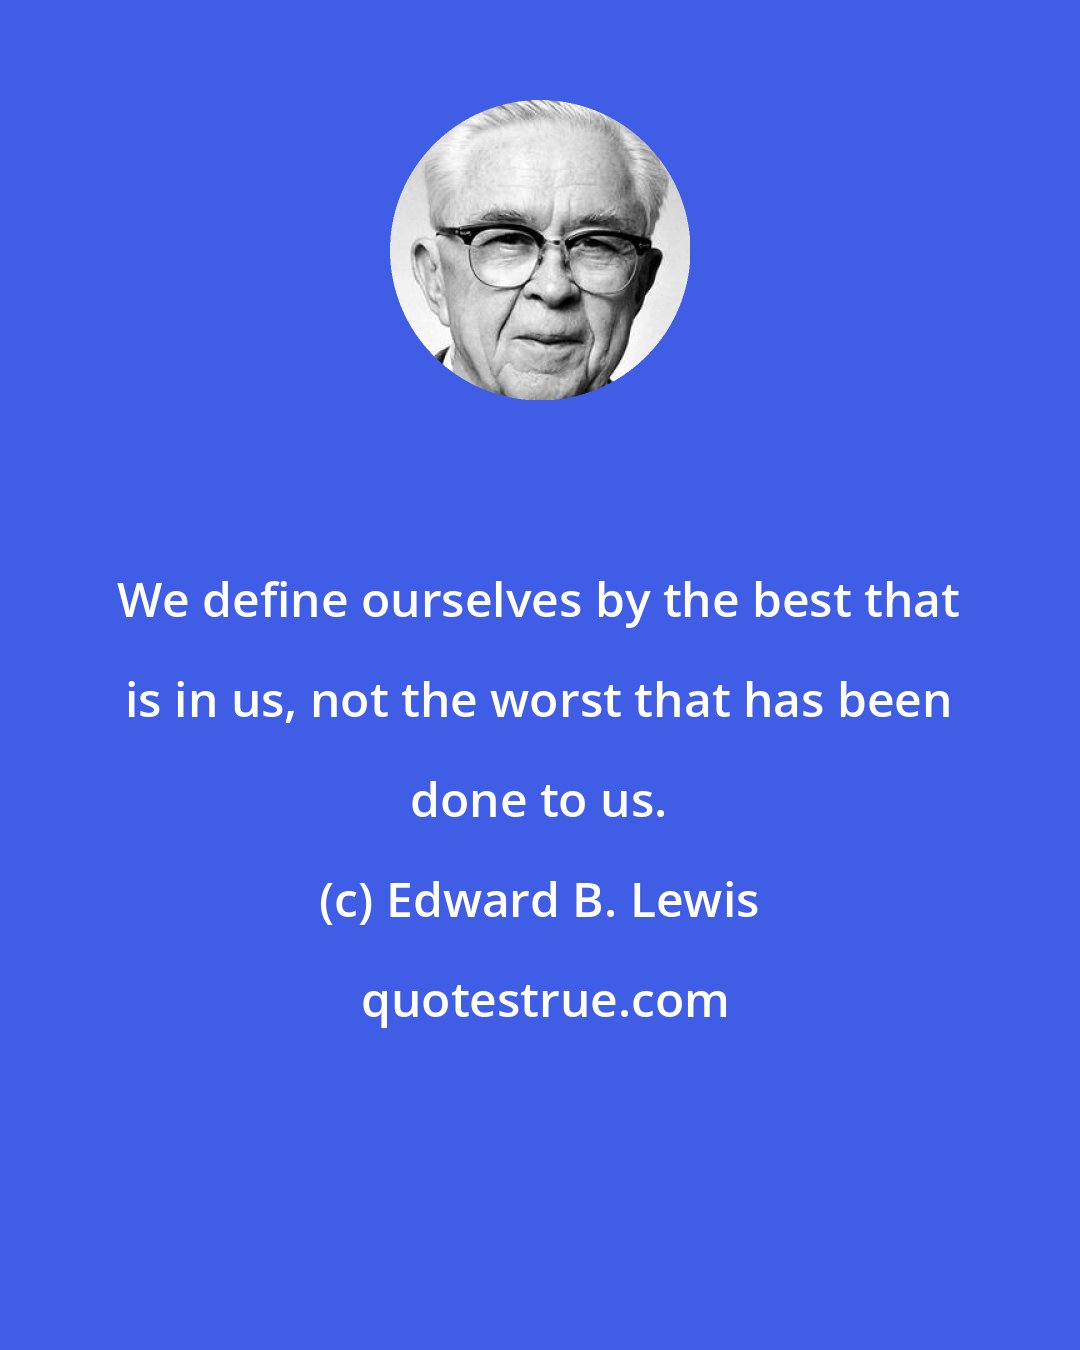 Edward B. Lewis: We define ourselves by the best that is in us, not the worst that has been done to us.